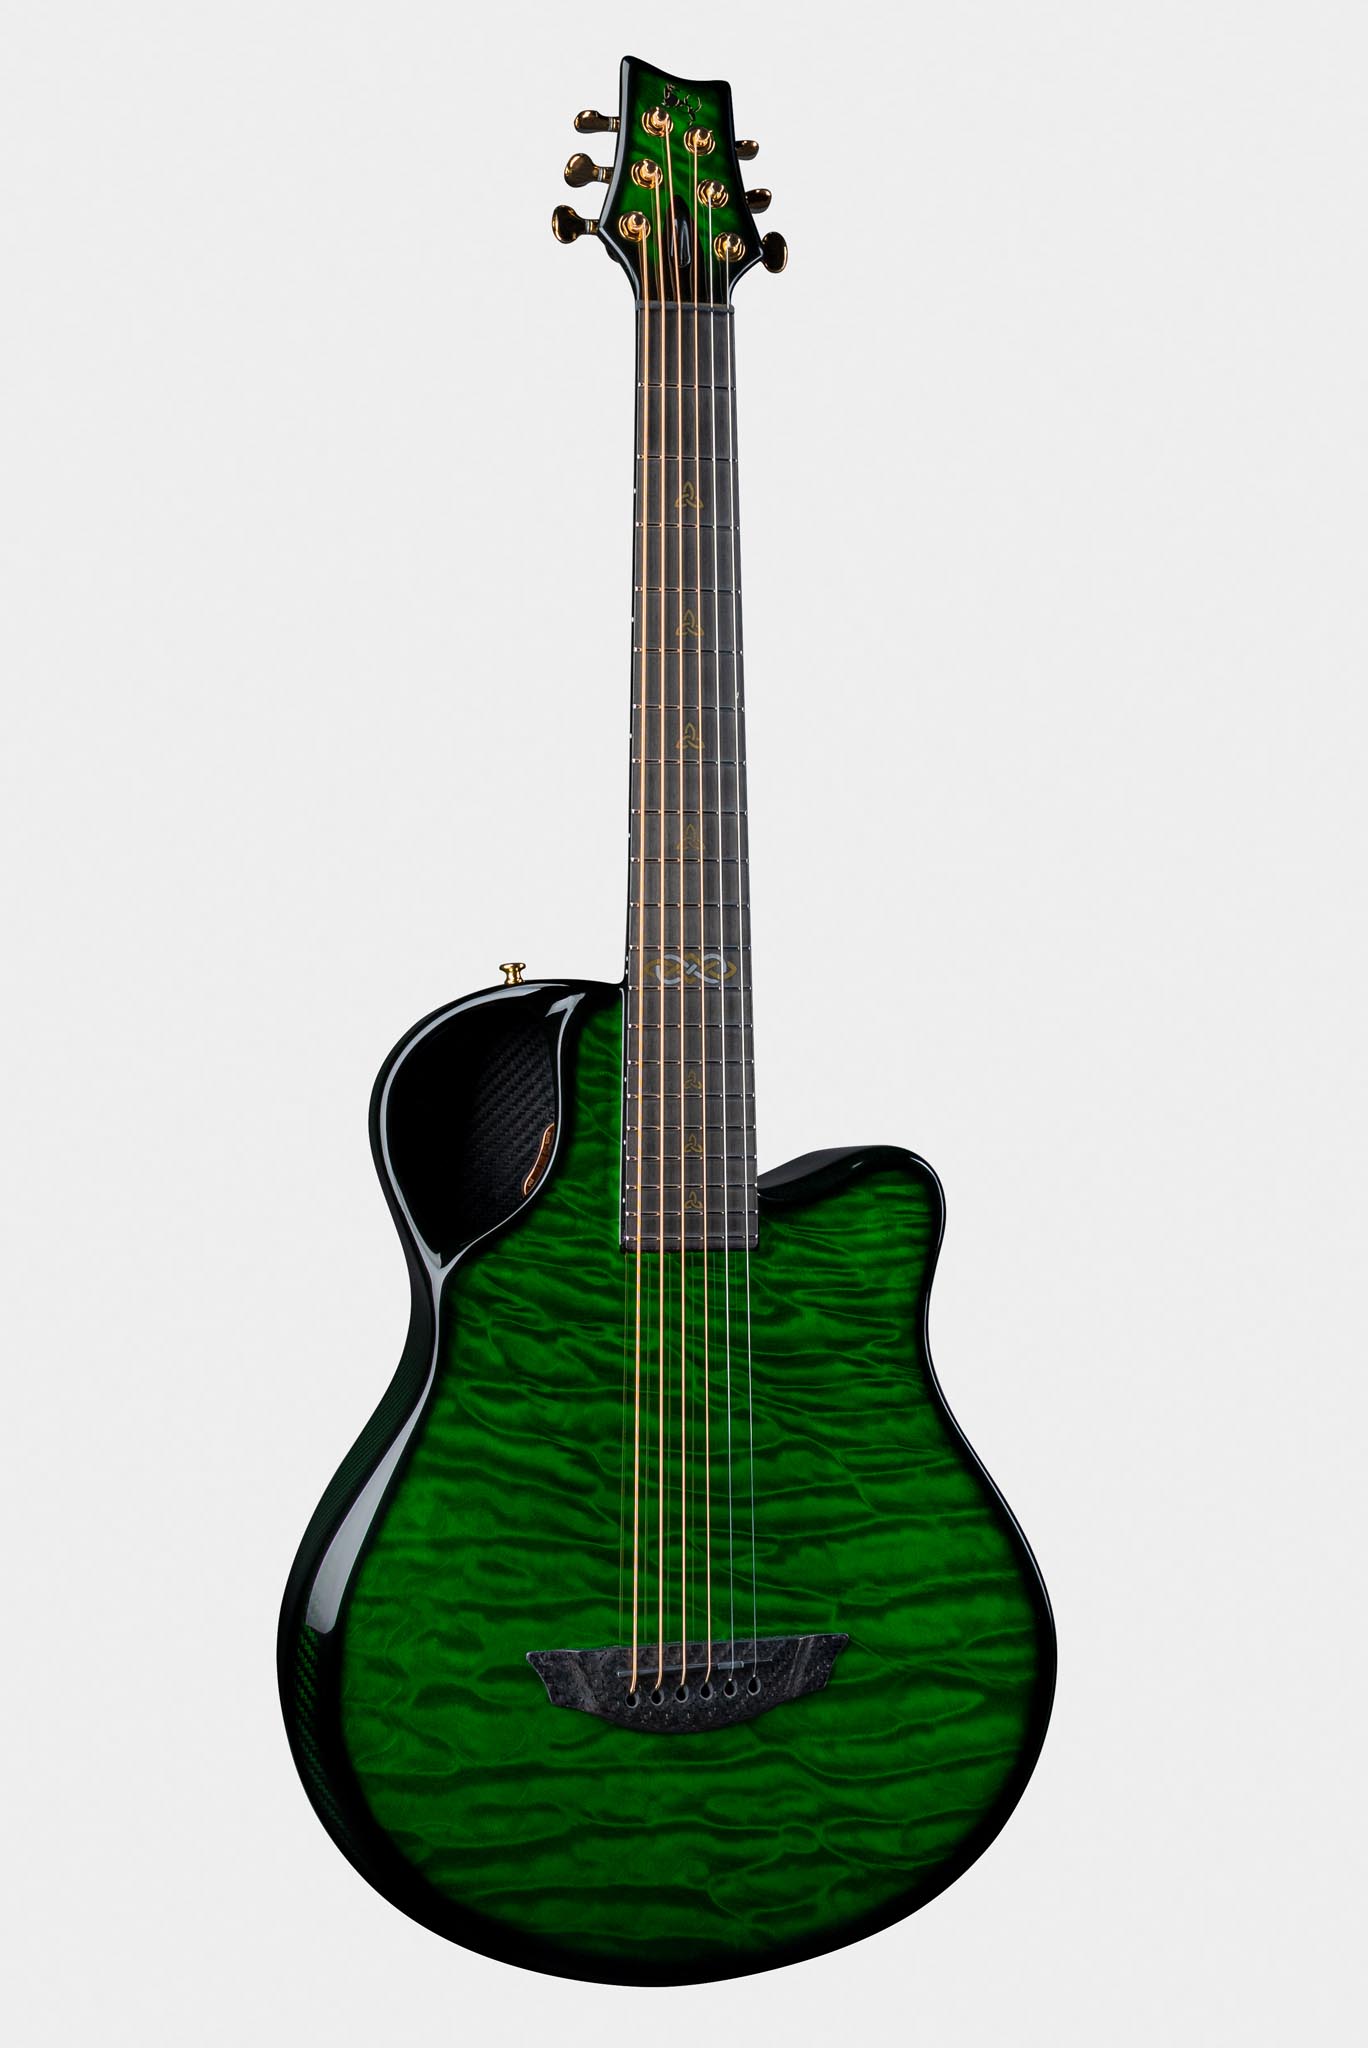 Emerald X7 Acoustic Guitar in Green Finish